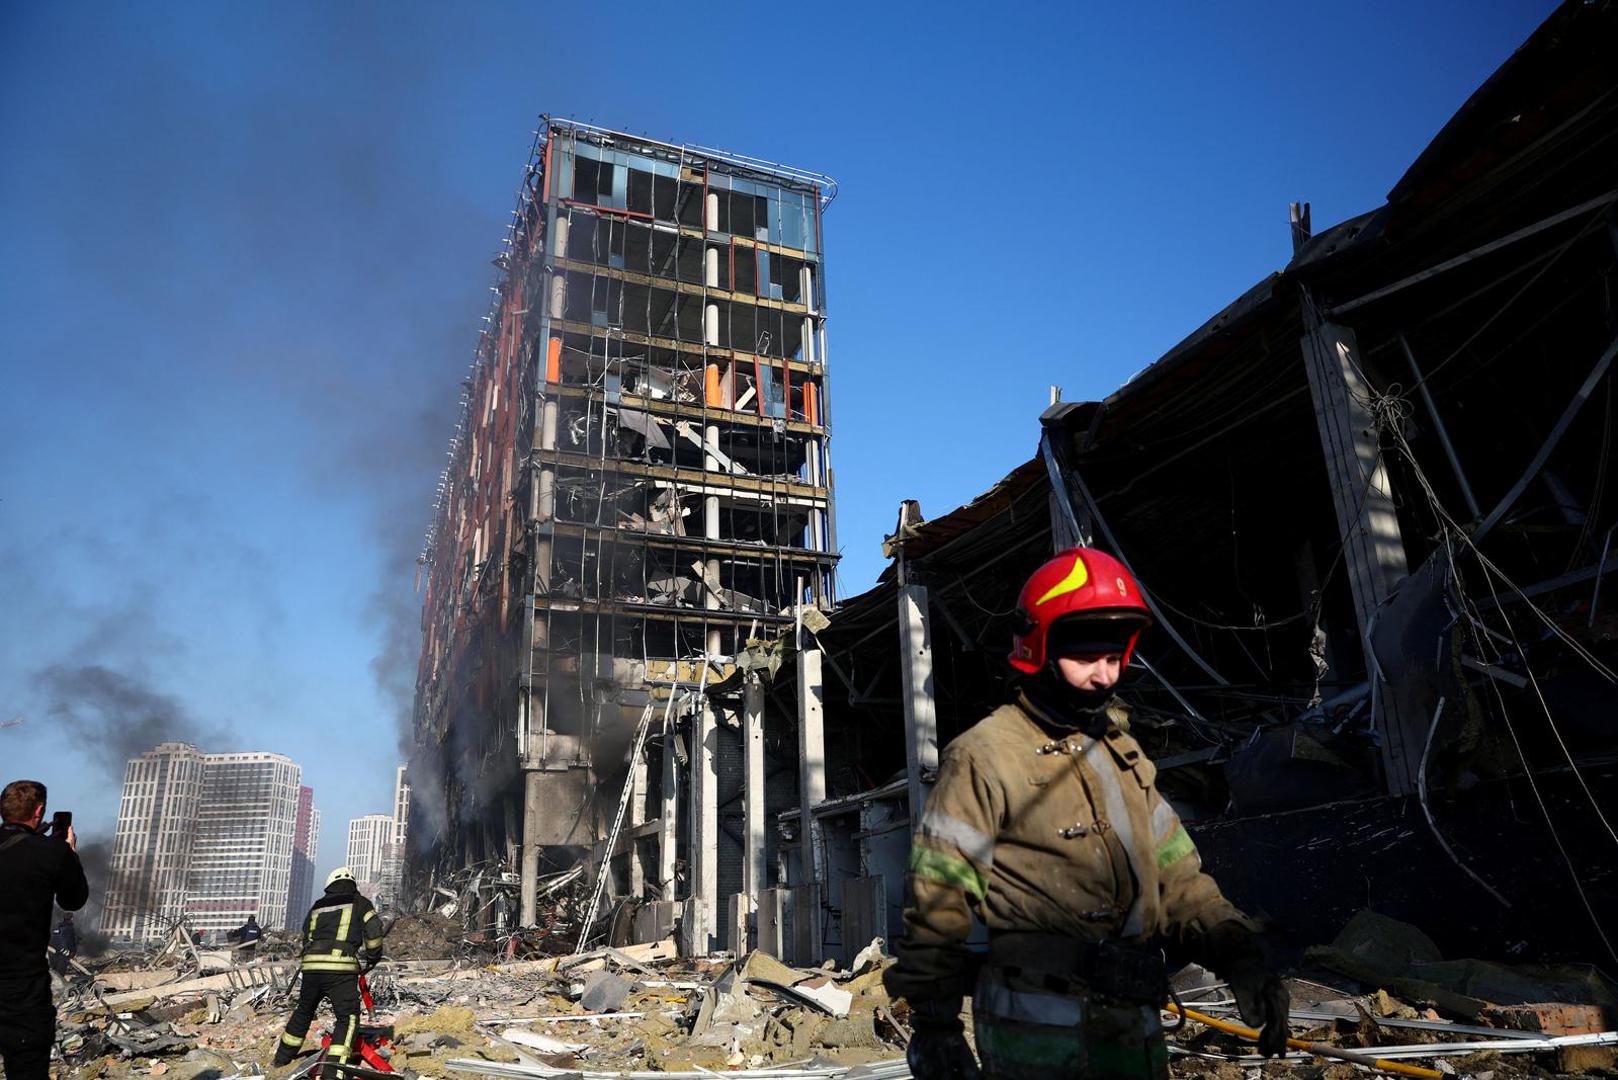 Rescuers work at the site of a bombing at a shopping center as Russia's invasion of Ukraine continues, in Kyiv, Ukraine March 21, 2022. REUTERS/Marko Djurica Photo: MARKO DJURICA/REUTERS